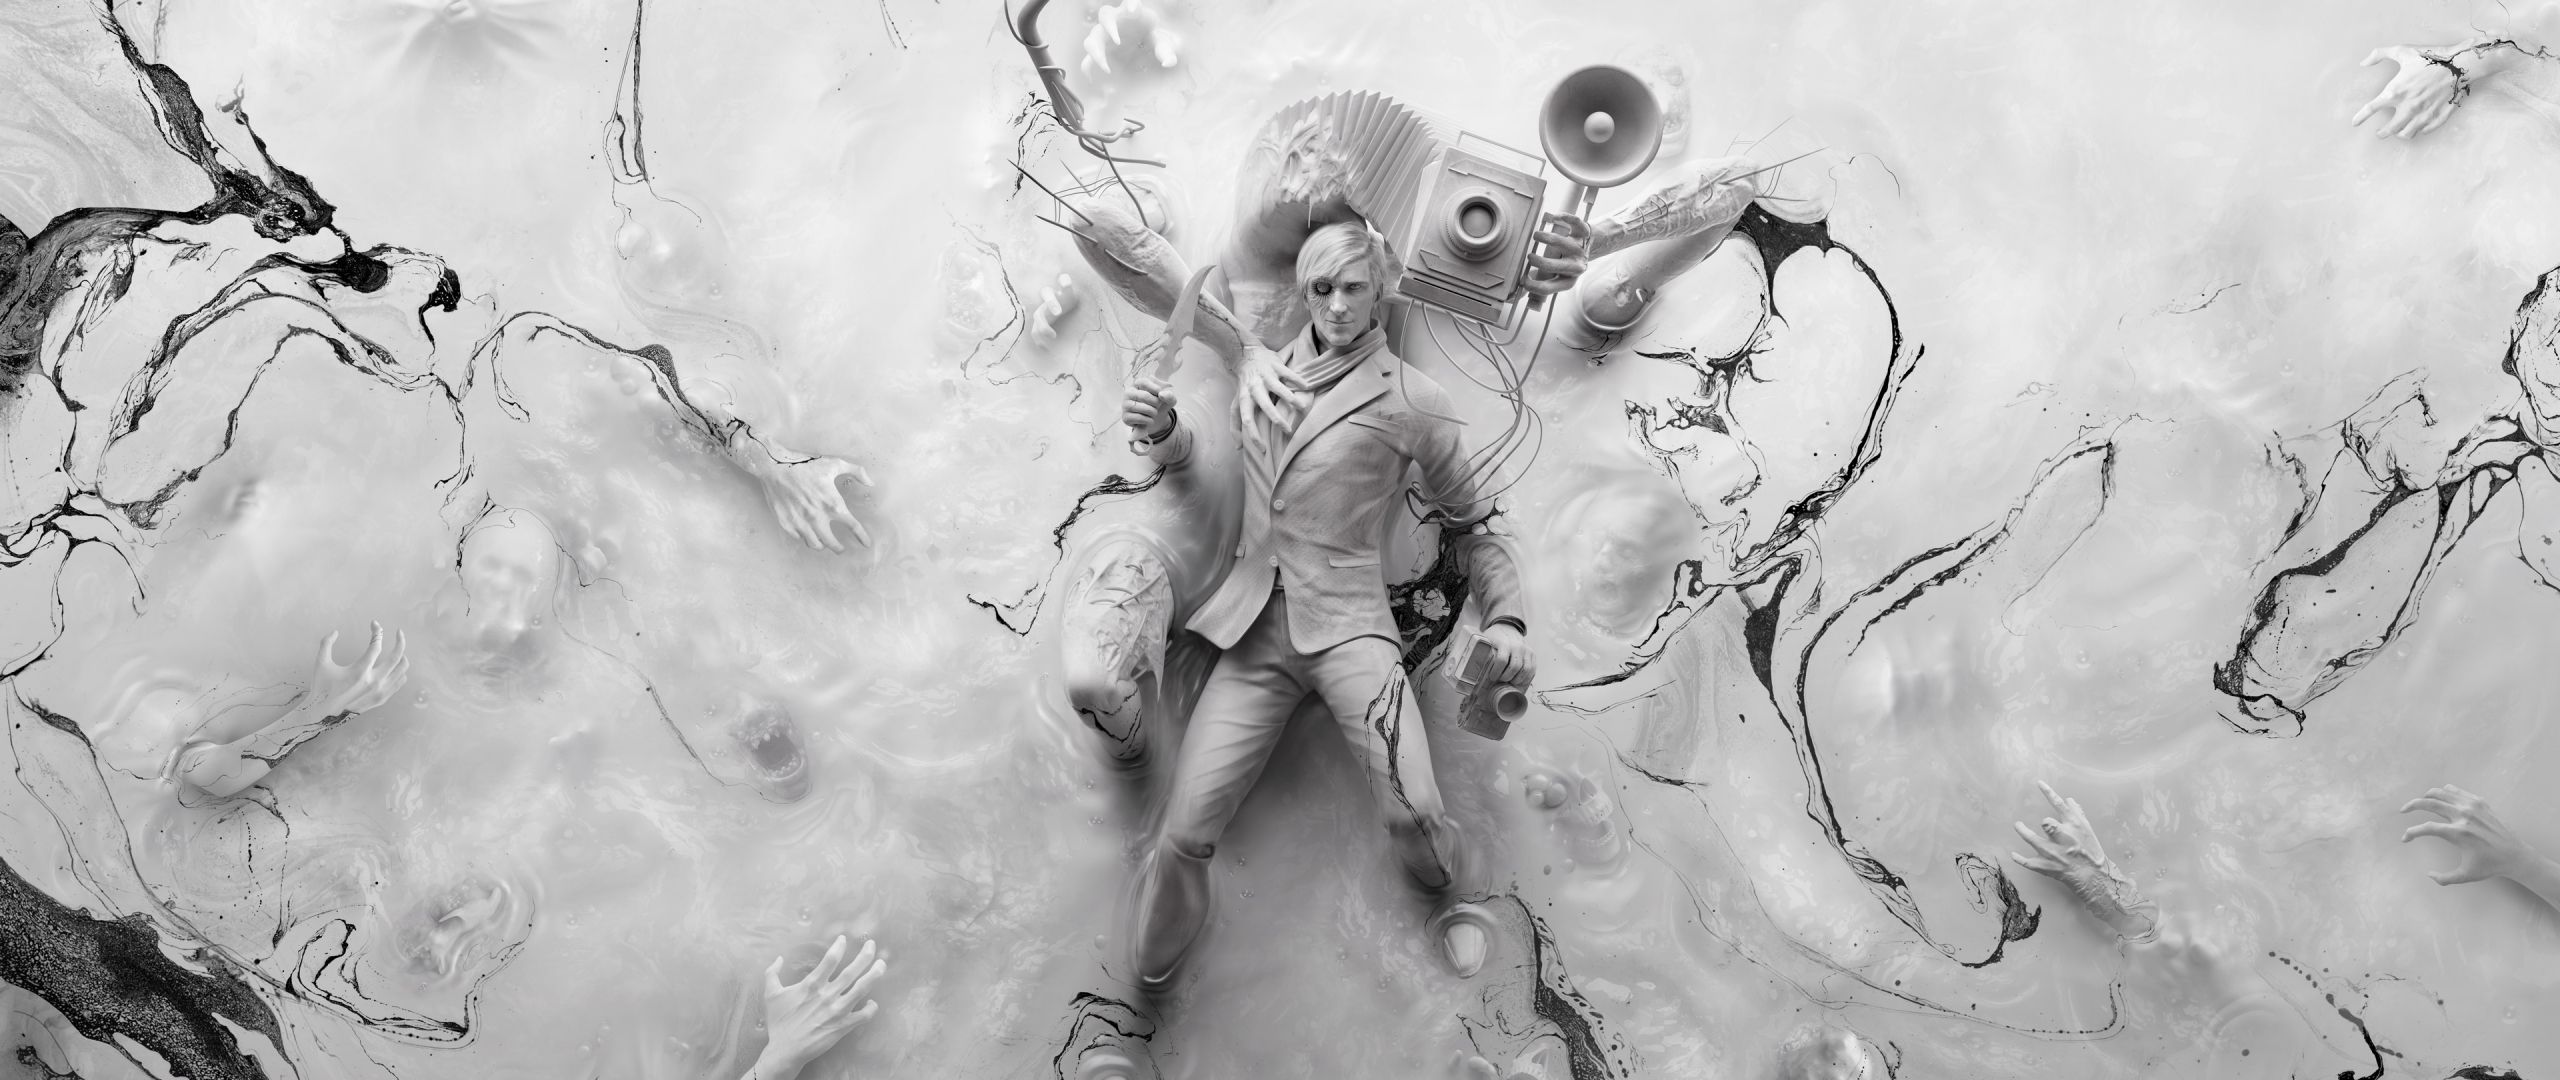 Download 2560x1080 wallpaper the evil within stefano